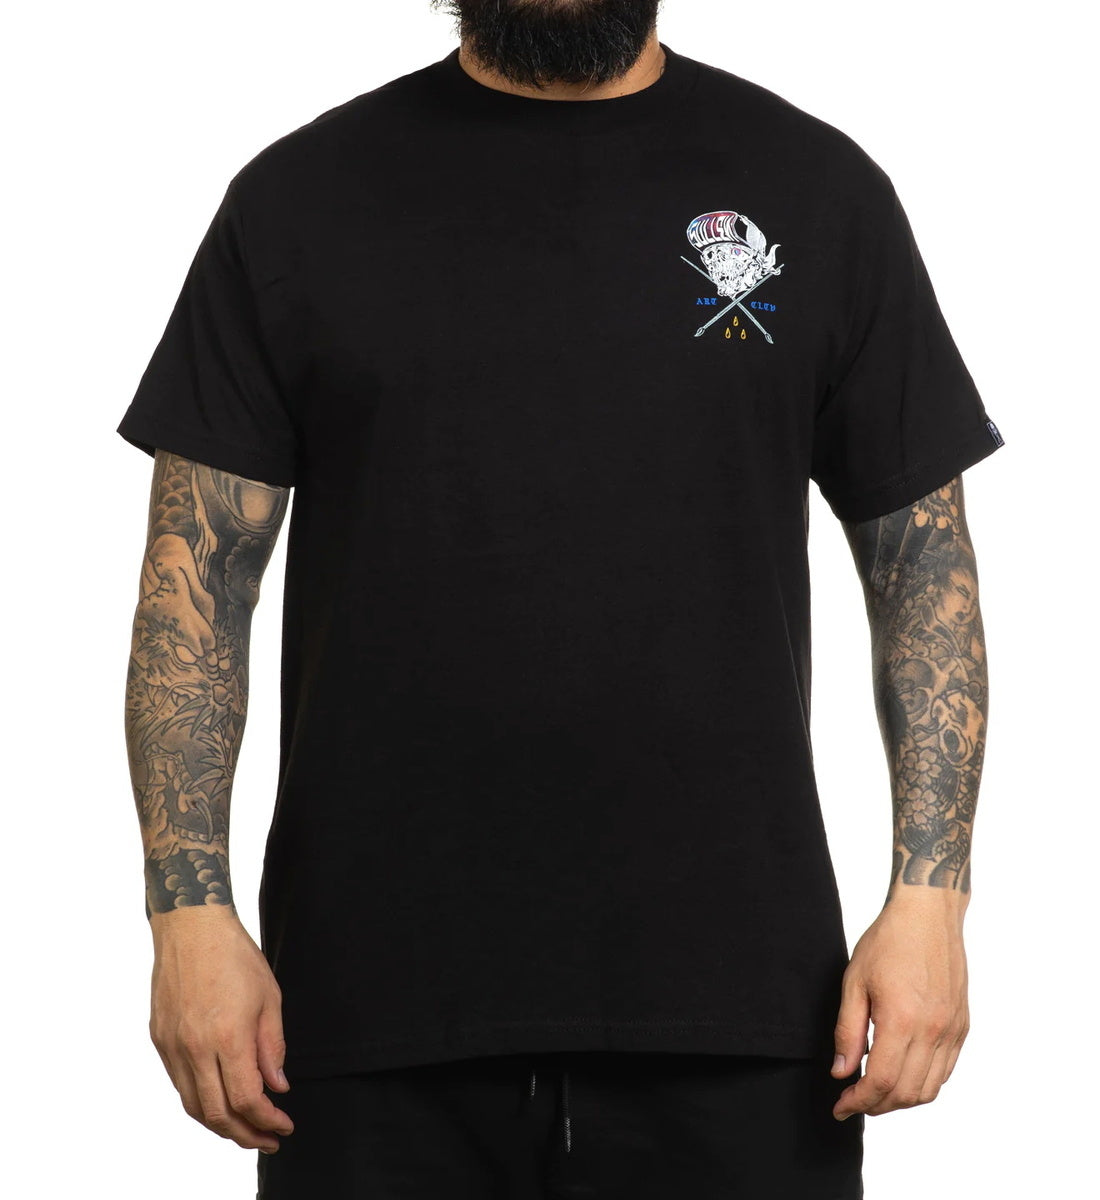 Sullen Clothing T-Shirt- All Nighters